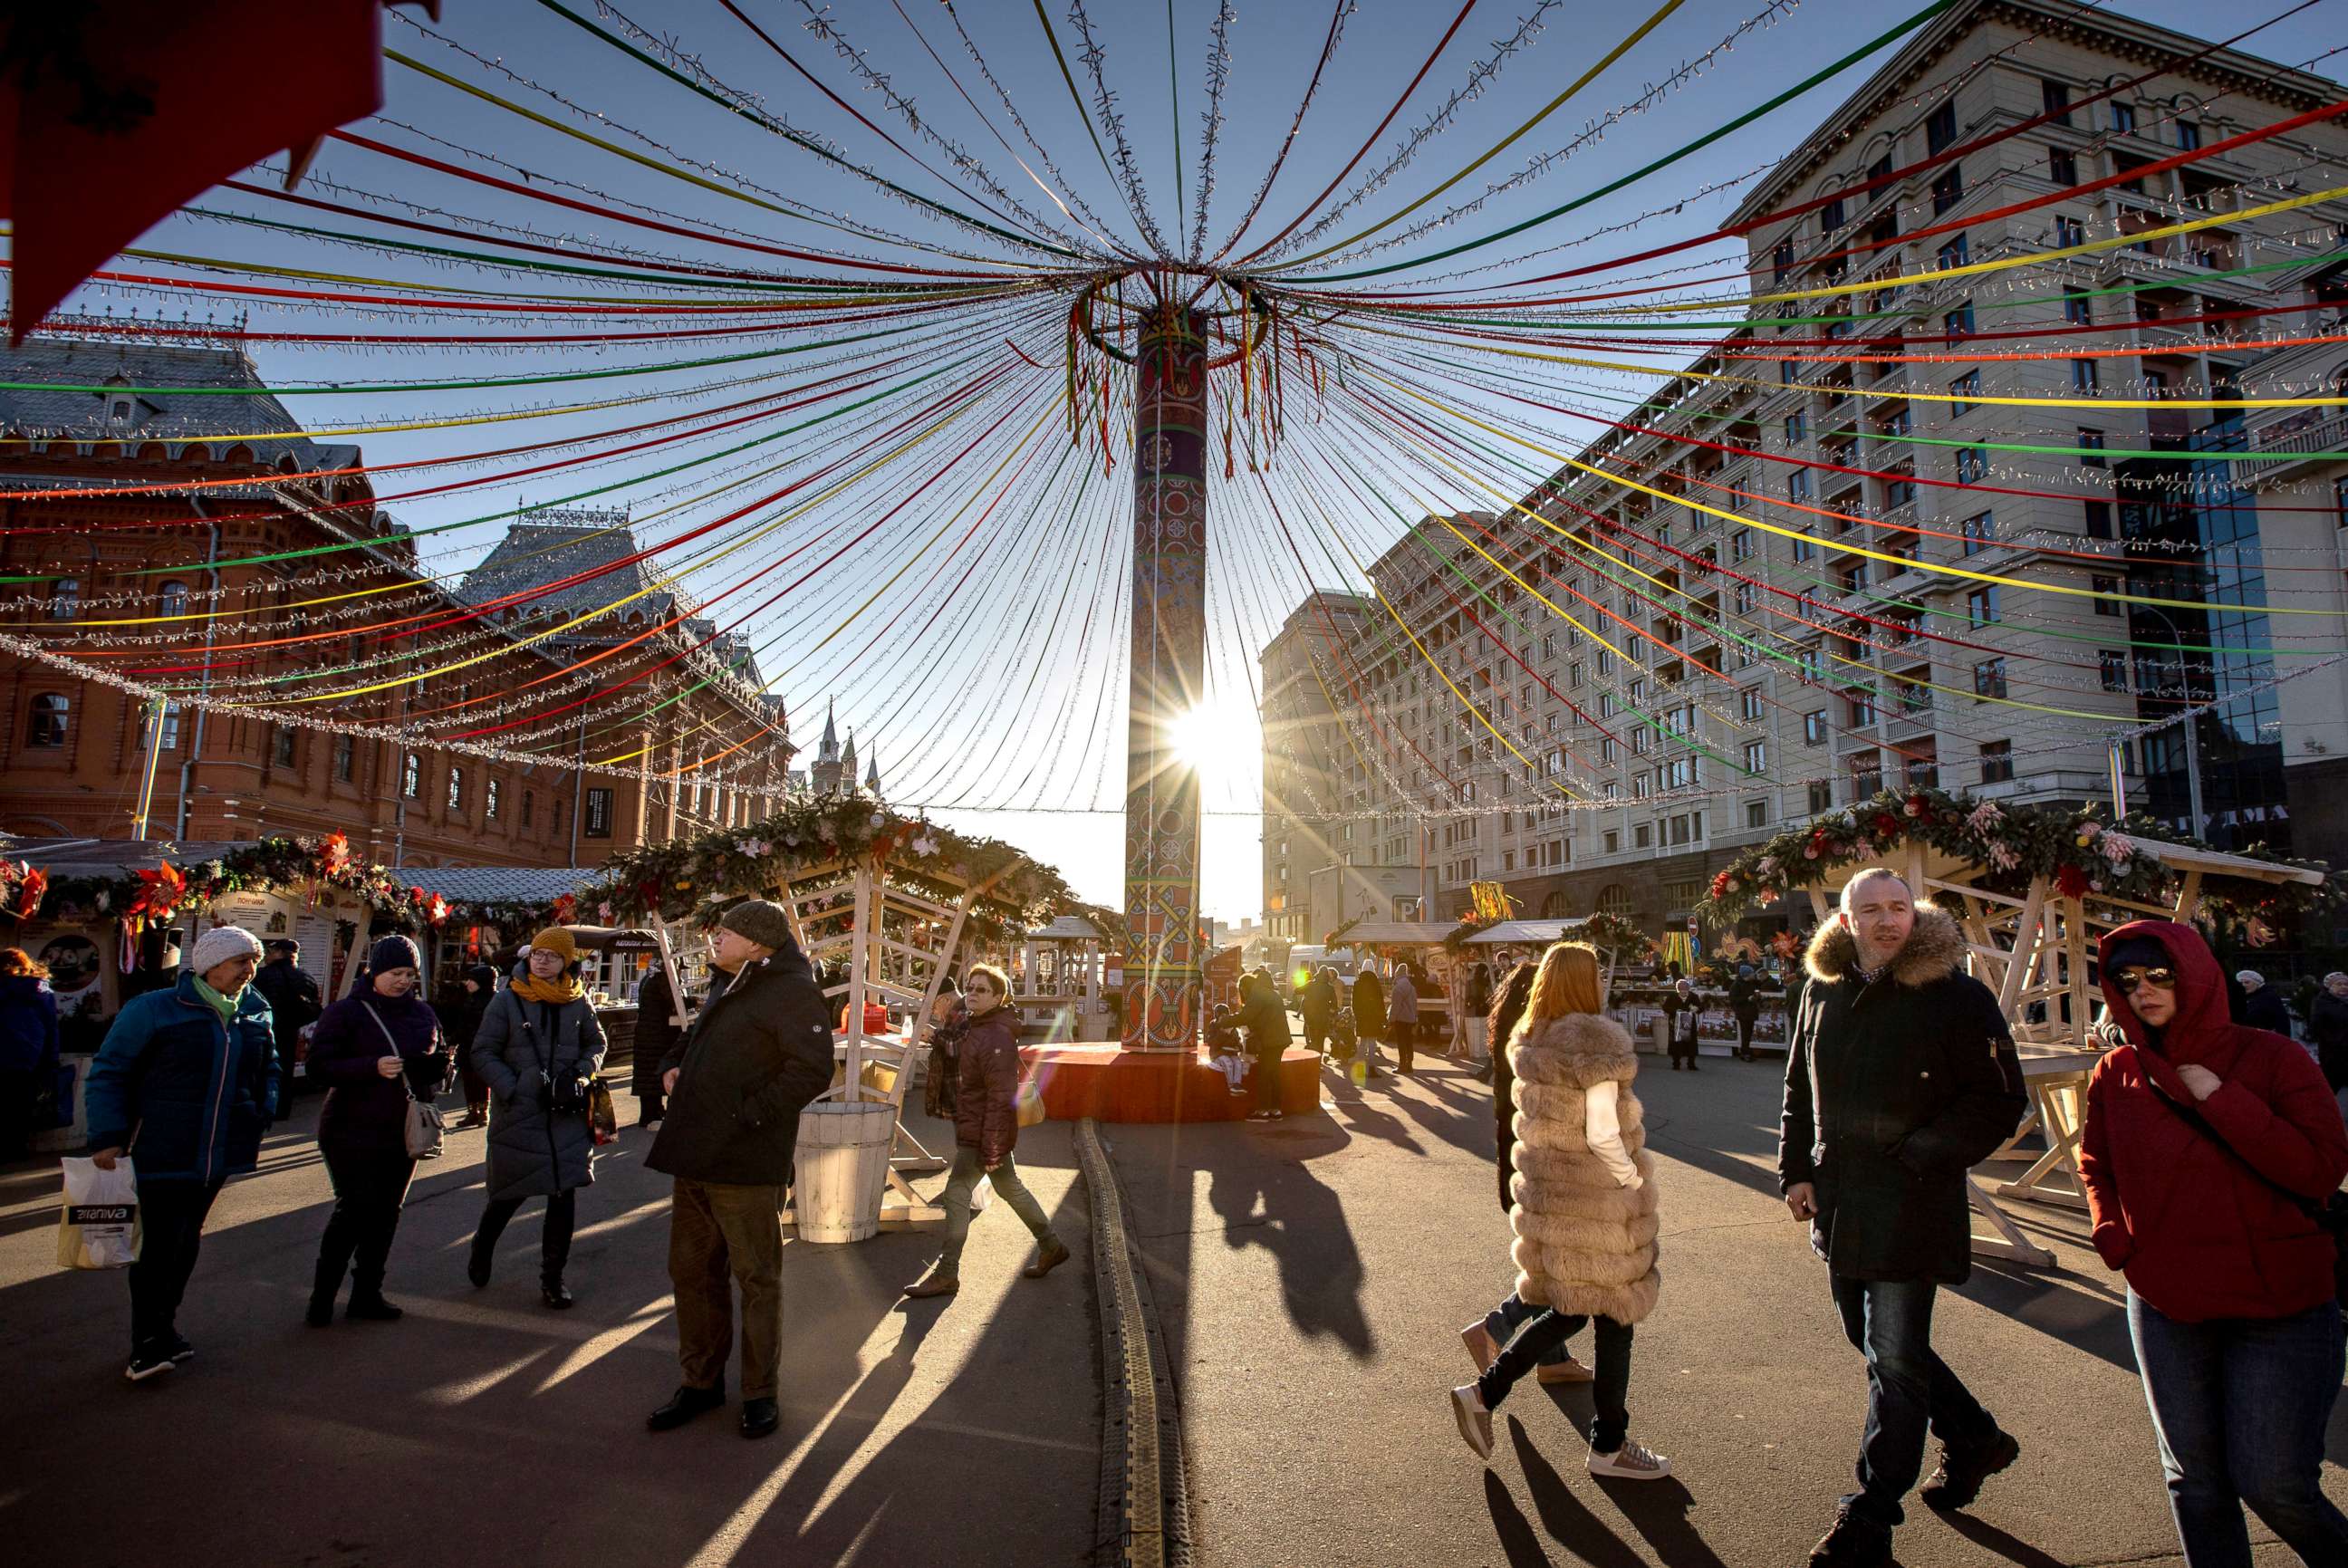 PHOTO: Tourists walk at a holiday market during Maslenitsa (Shrovetide) celebrations in front of the Historical Museum, left, and historical hotel Moscow on Revolution Square near the Kremlin Wall in Moscow, Russia, Feb. 25, 2020.